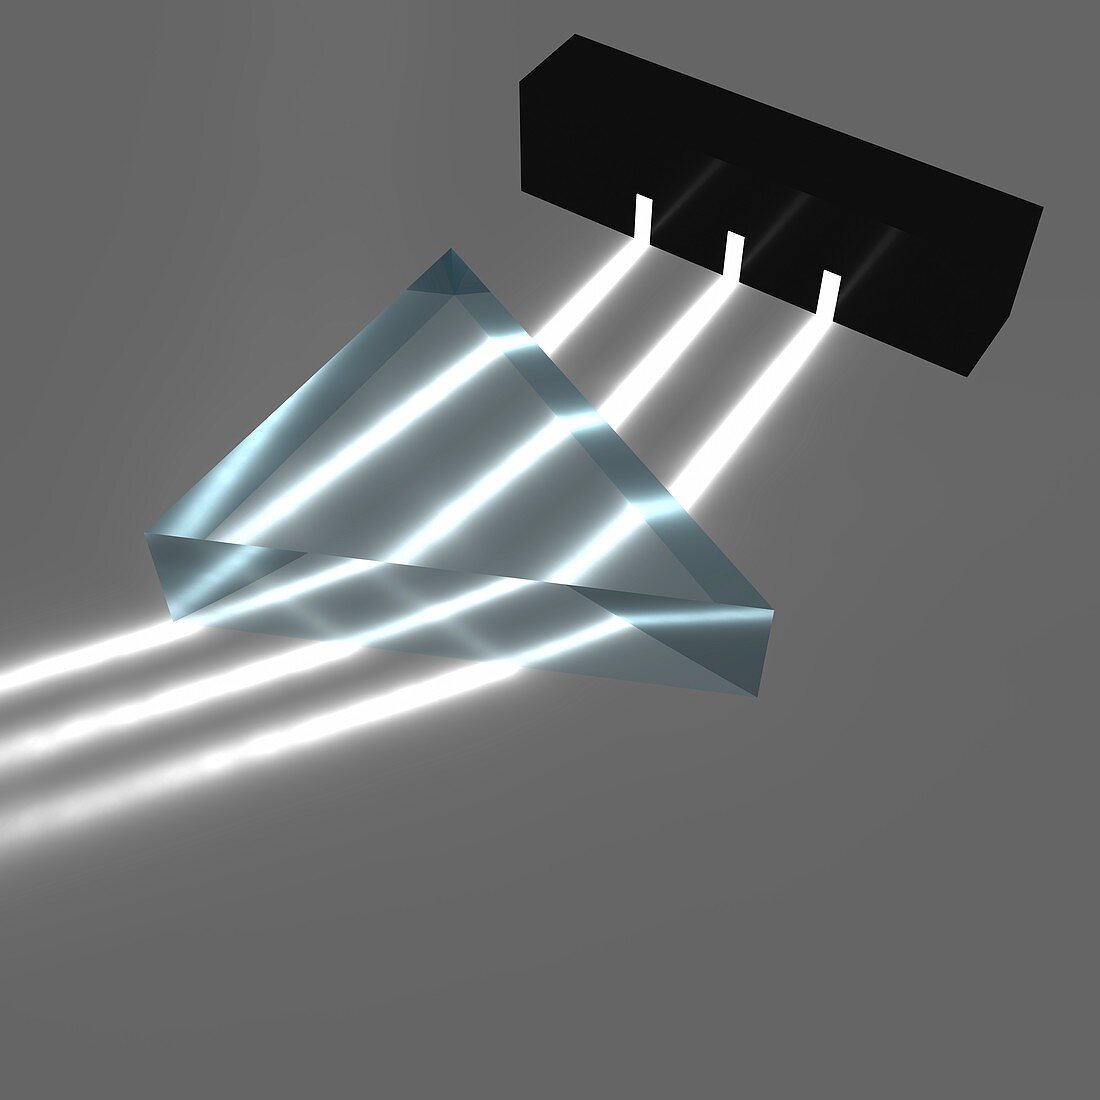 Light refraction with prism